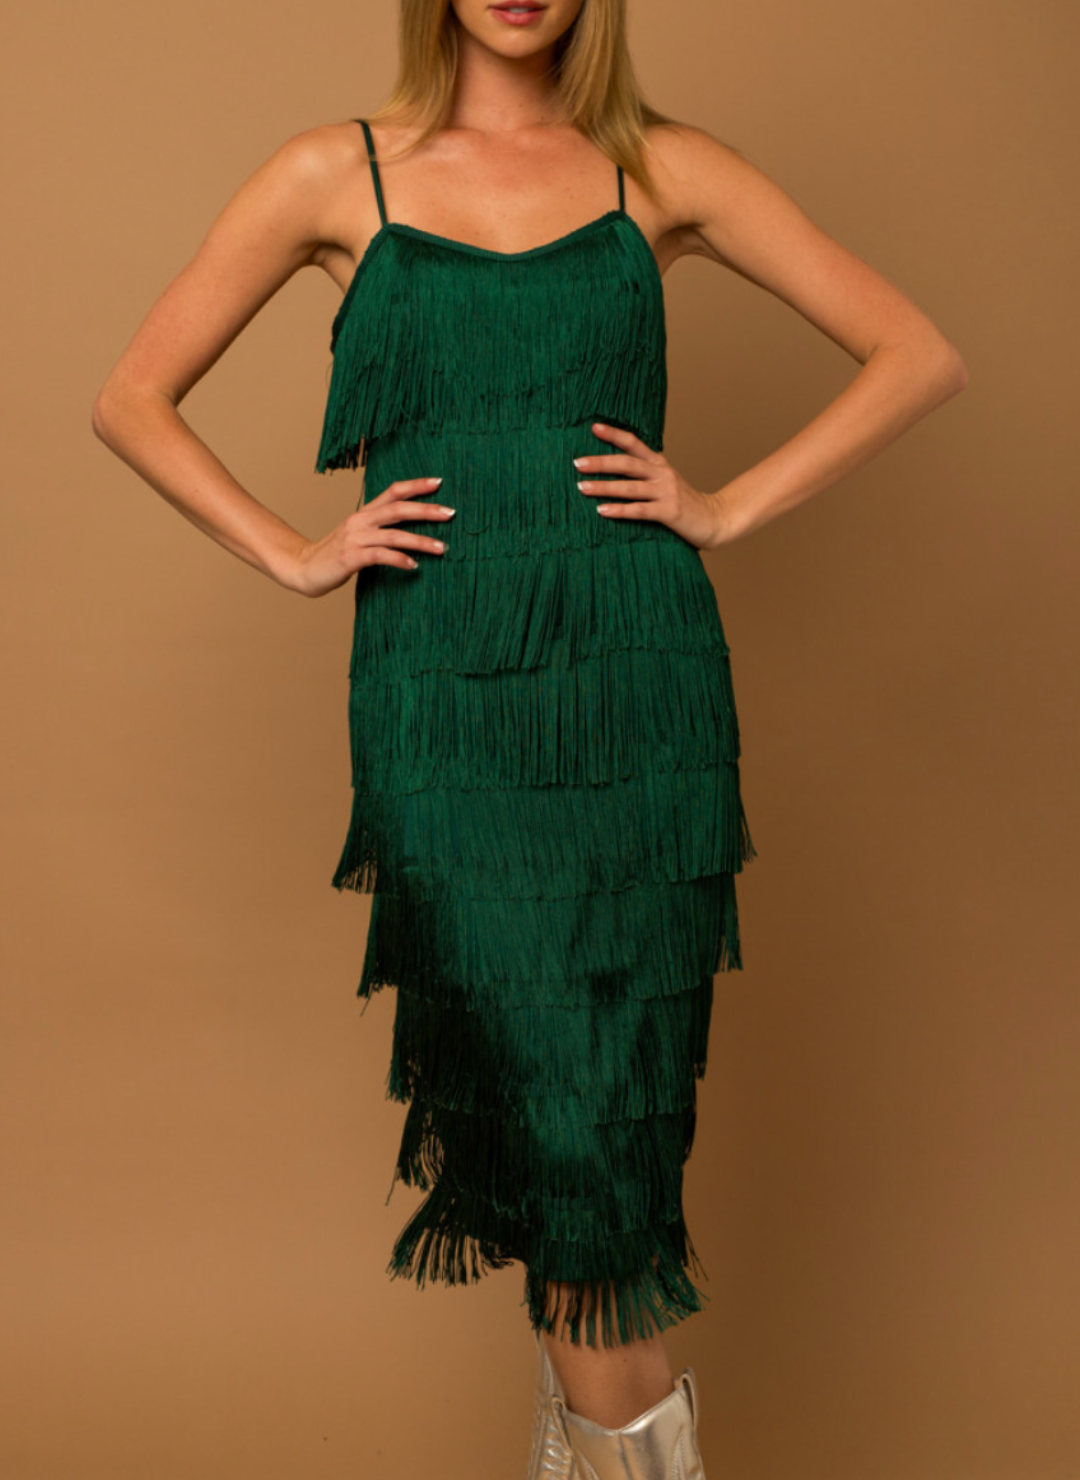 Model has hands on hips wearing Gi Fringe Strap Dress with vibrant green color and fun fringe.